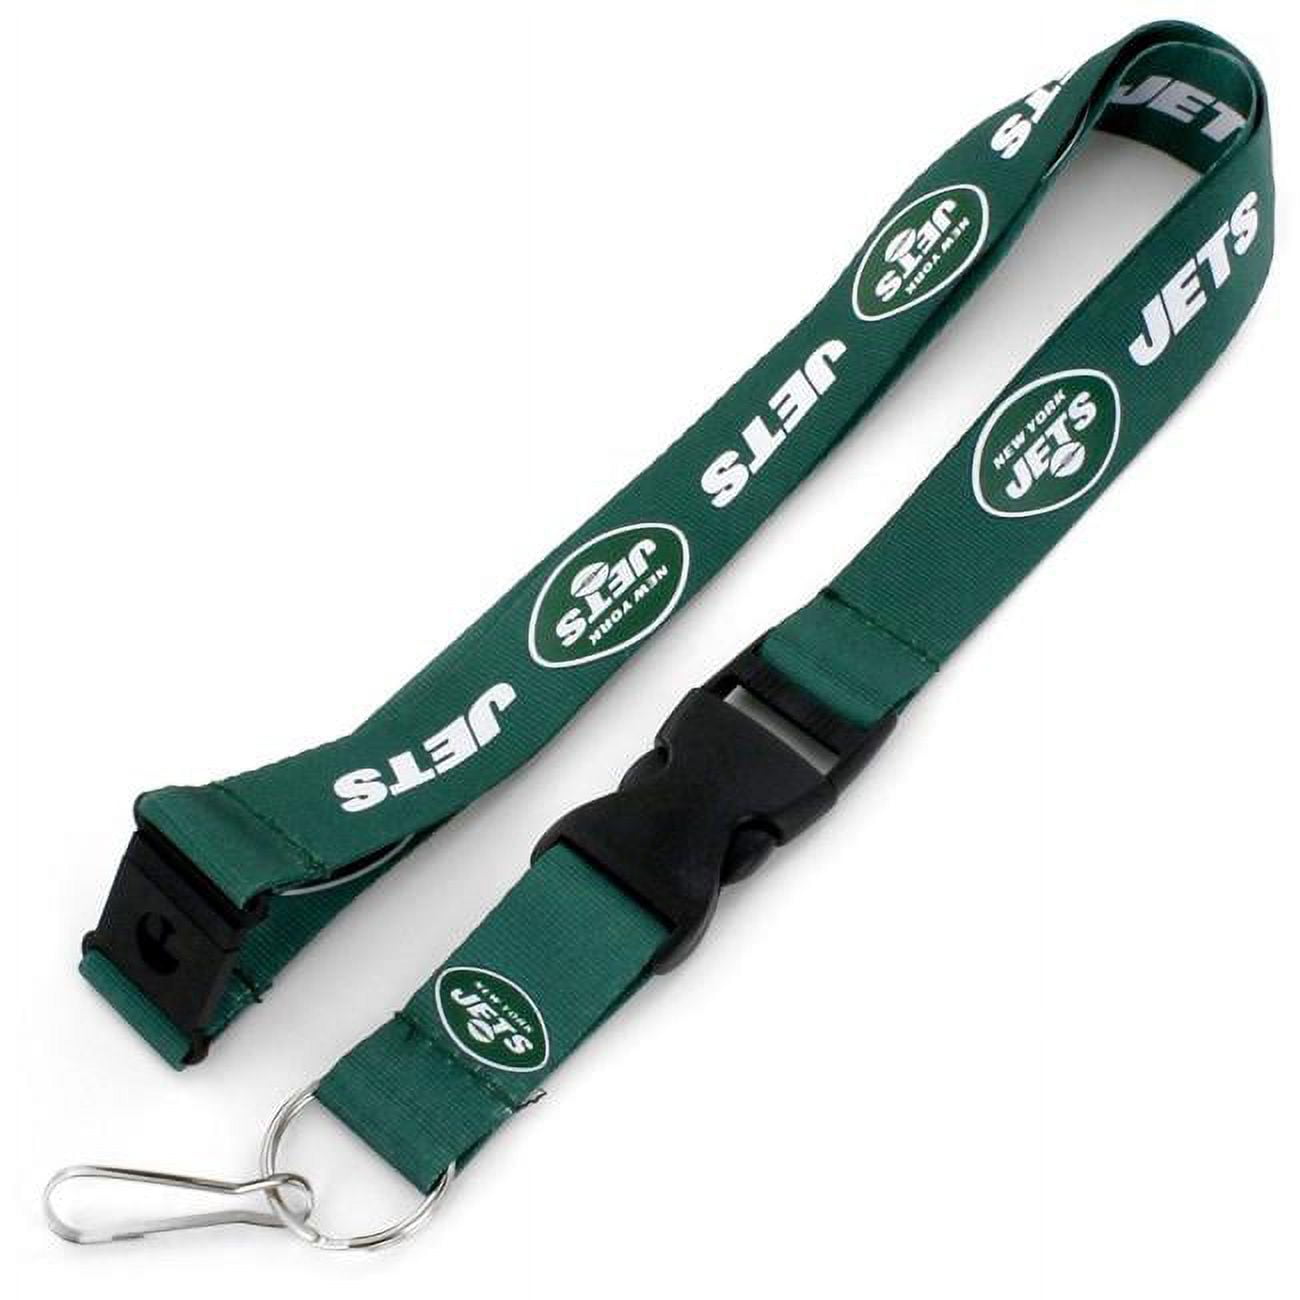 Picture of Amo 6326489994 New York Jets Lanyard, Green